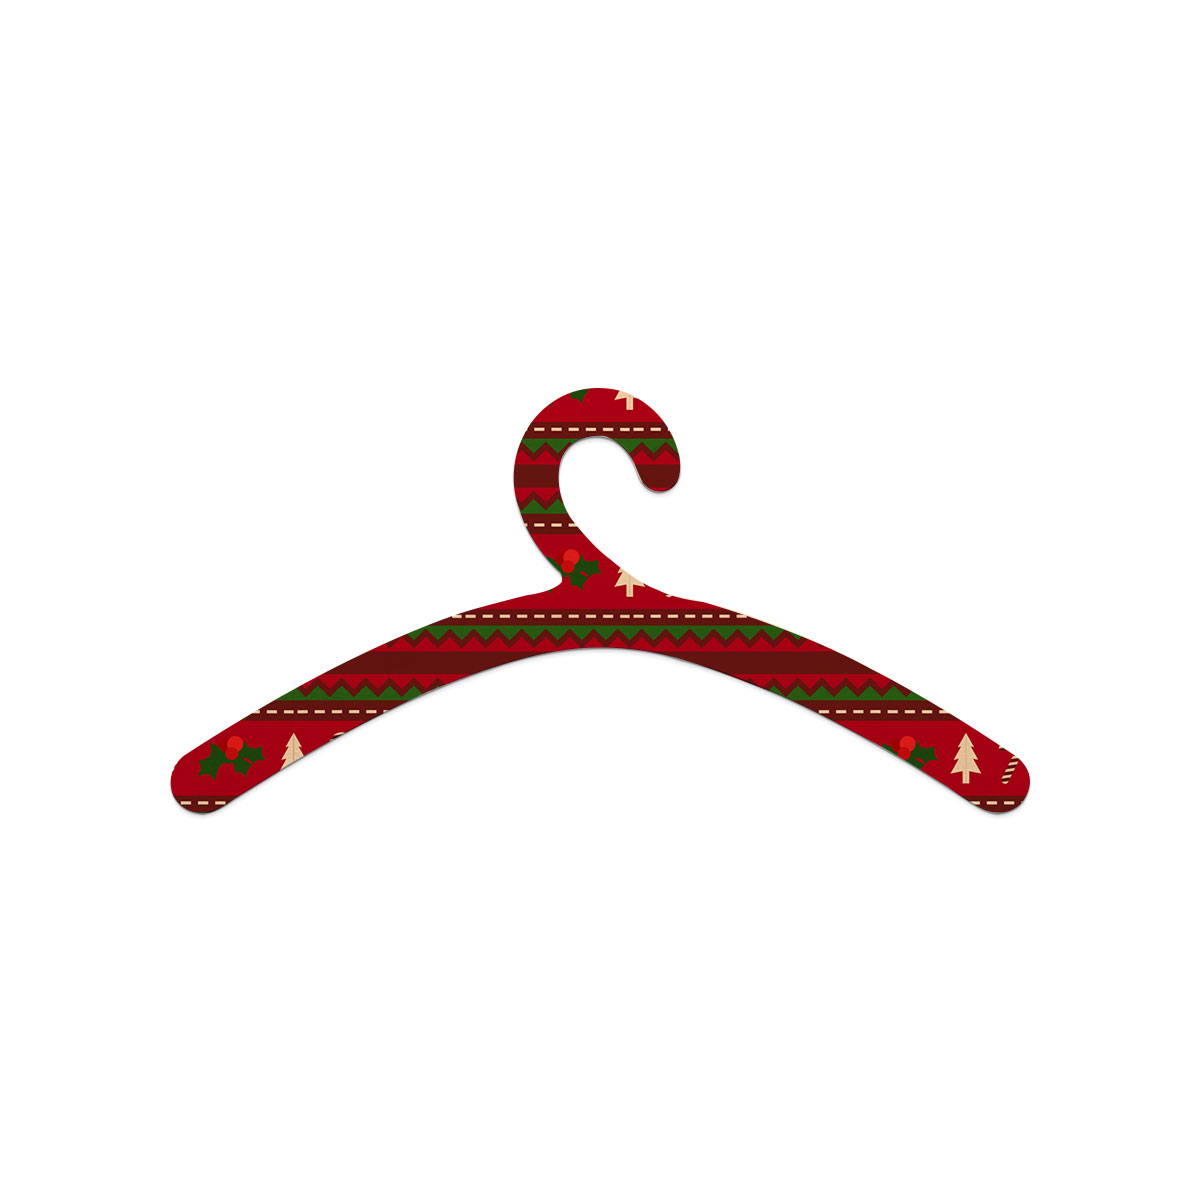 Red Green And White Christmas Tree, Holly Leaf With Candy Cane.jpg Wooden Hanger